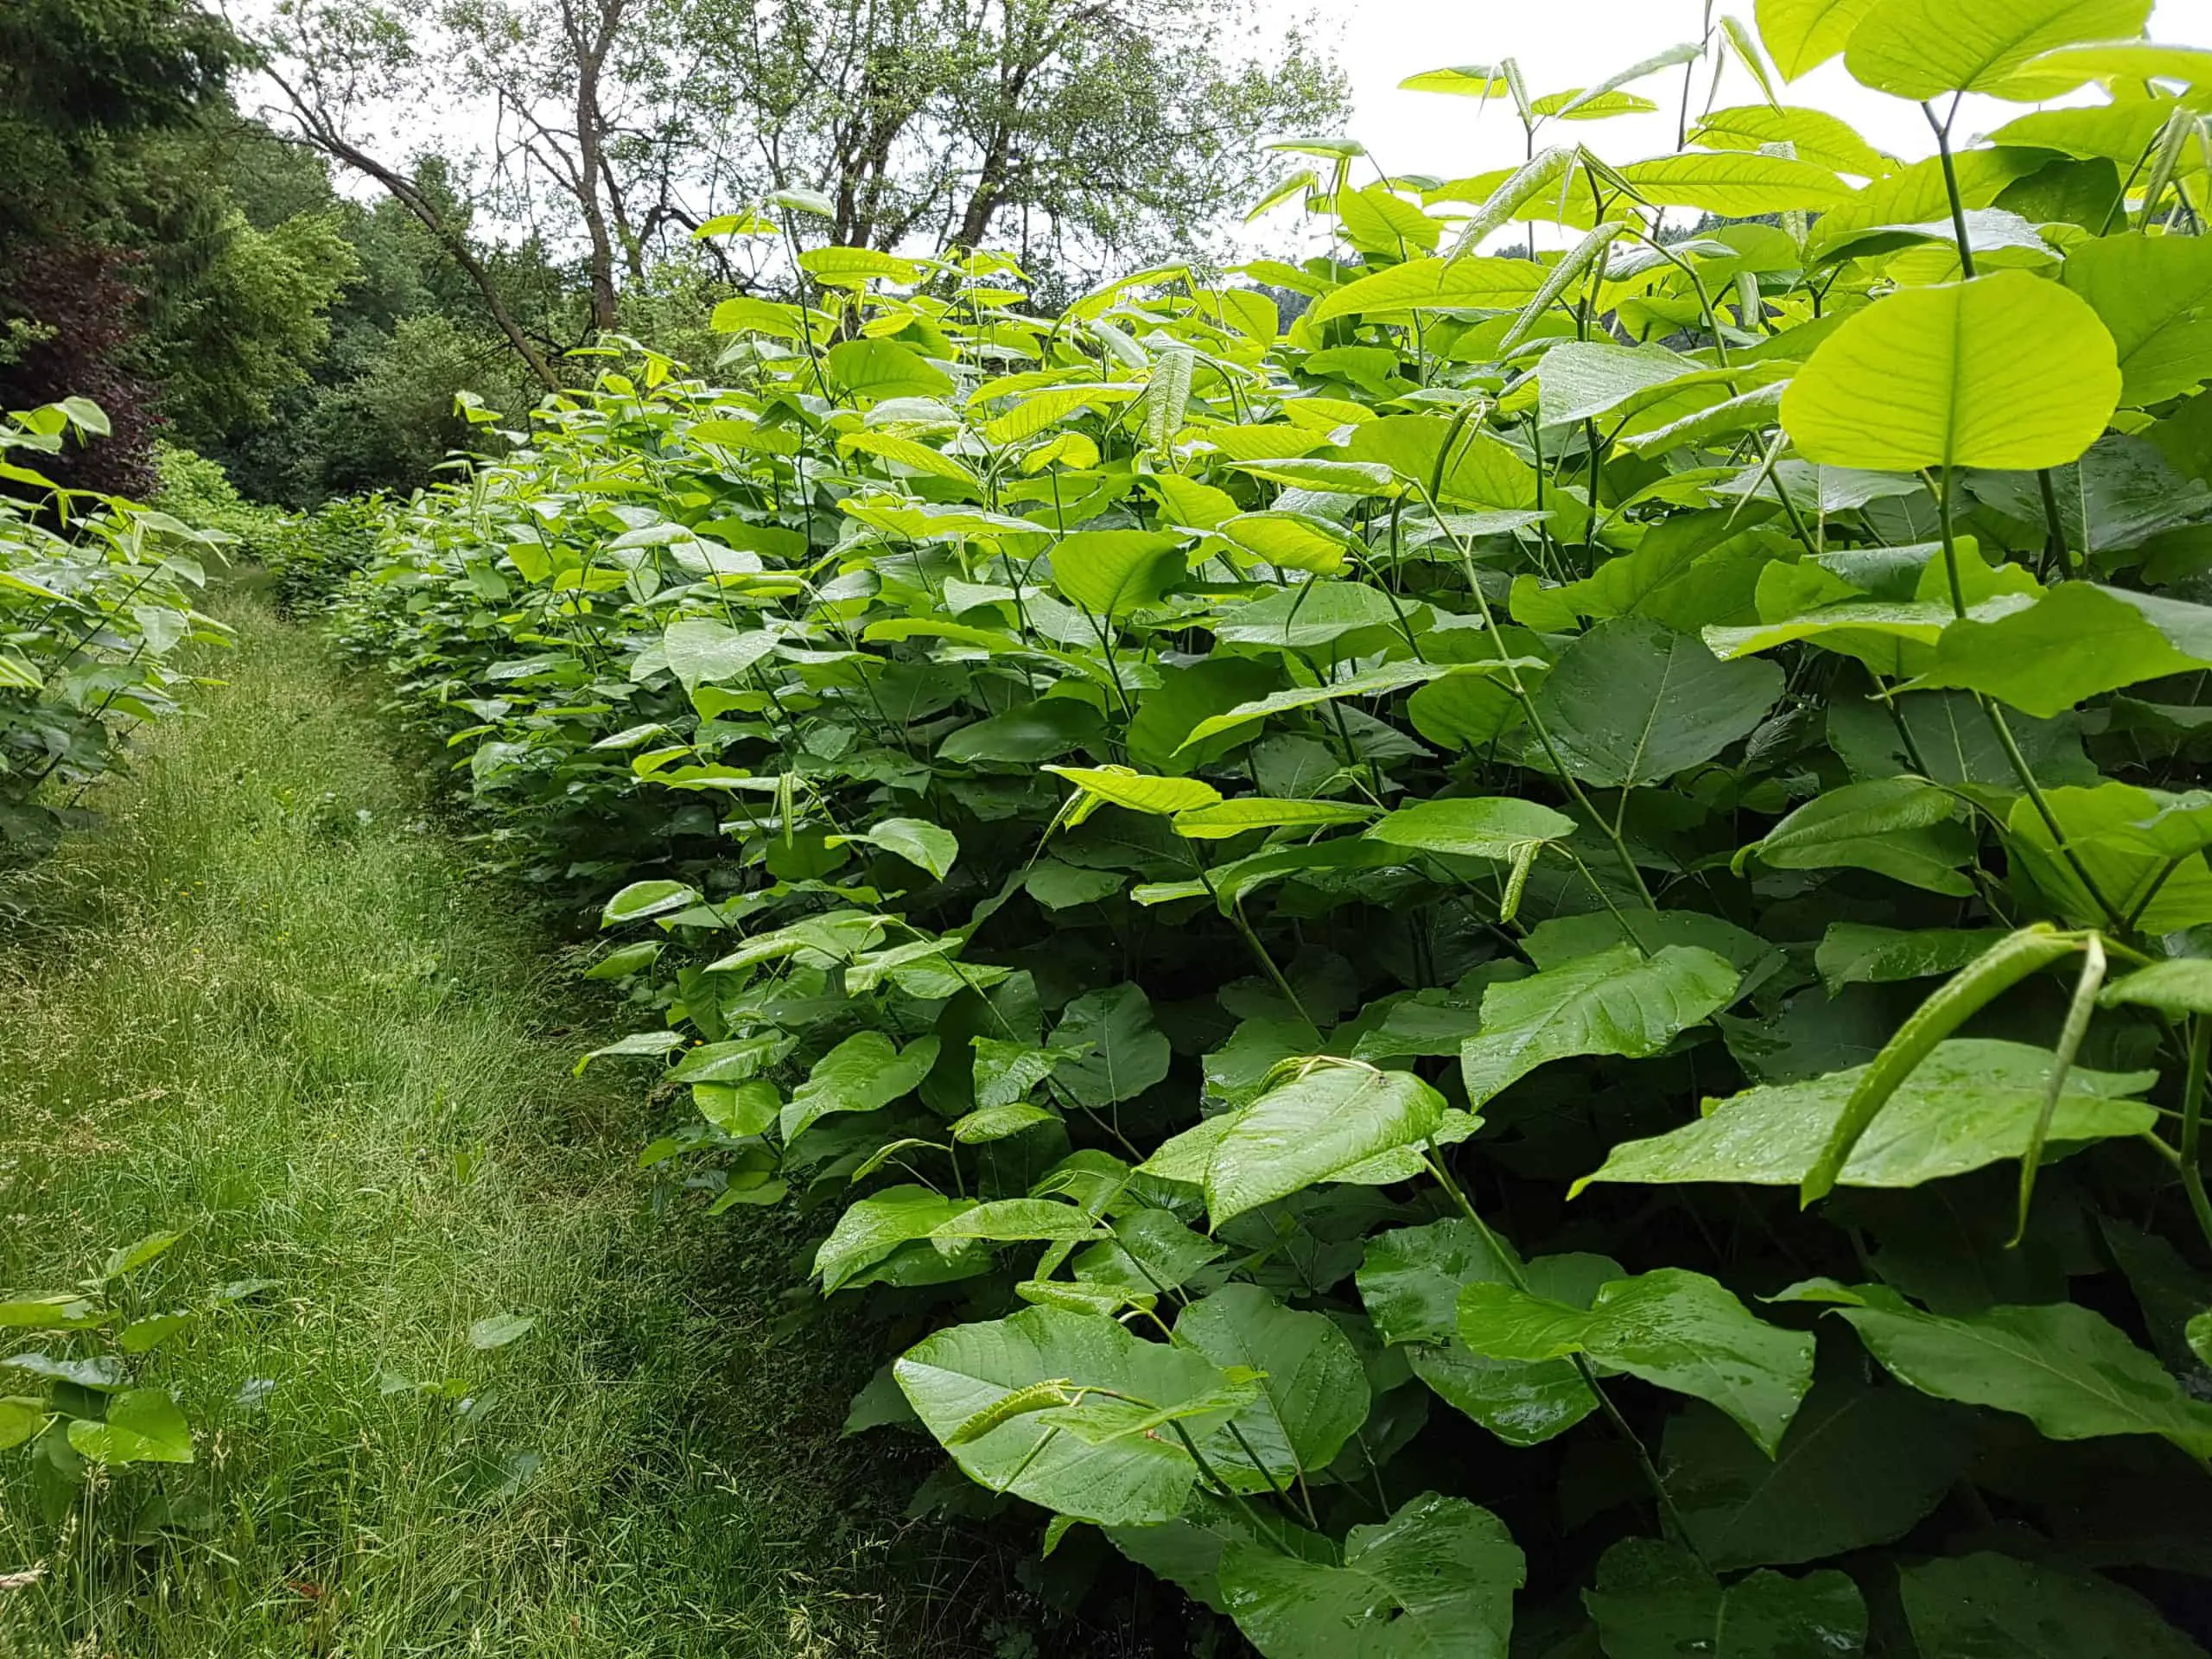 If left unchecked with no Japanese knotweed treatment it can infest large unspoilt areas of beauty